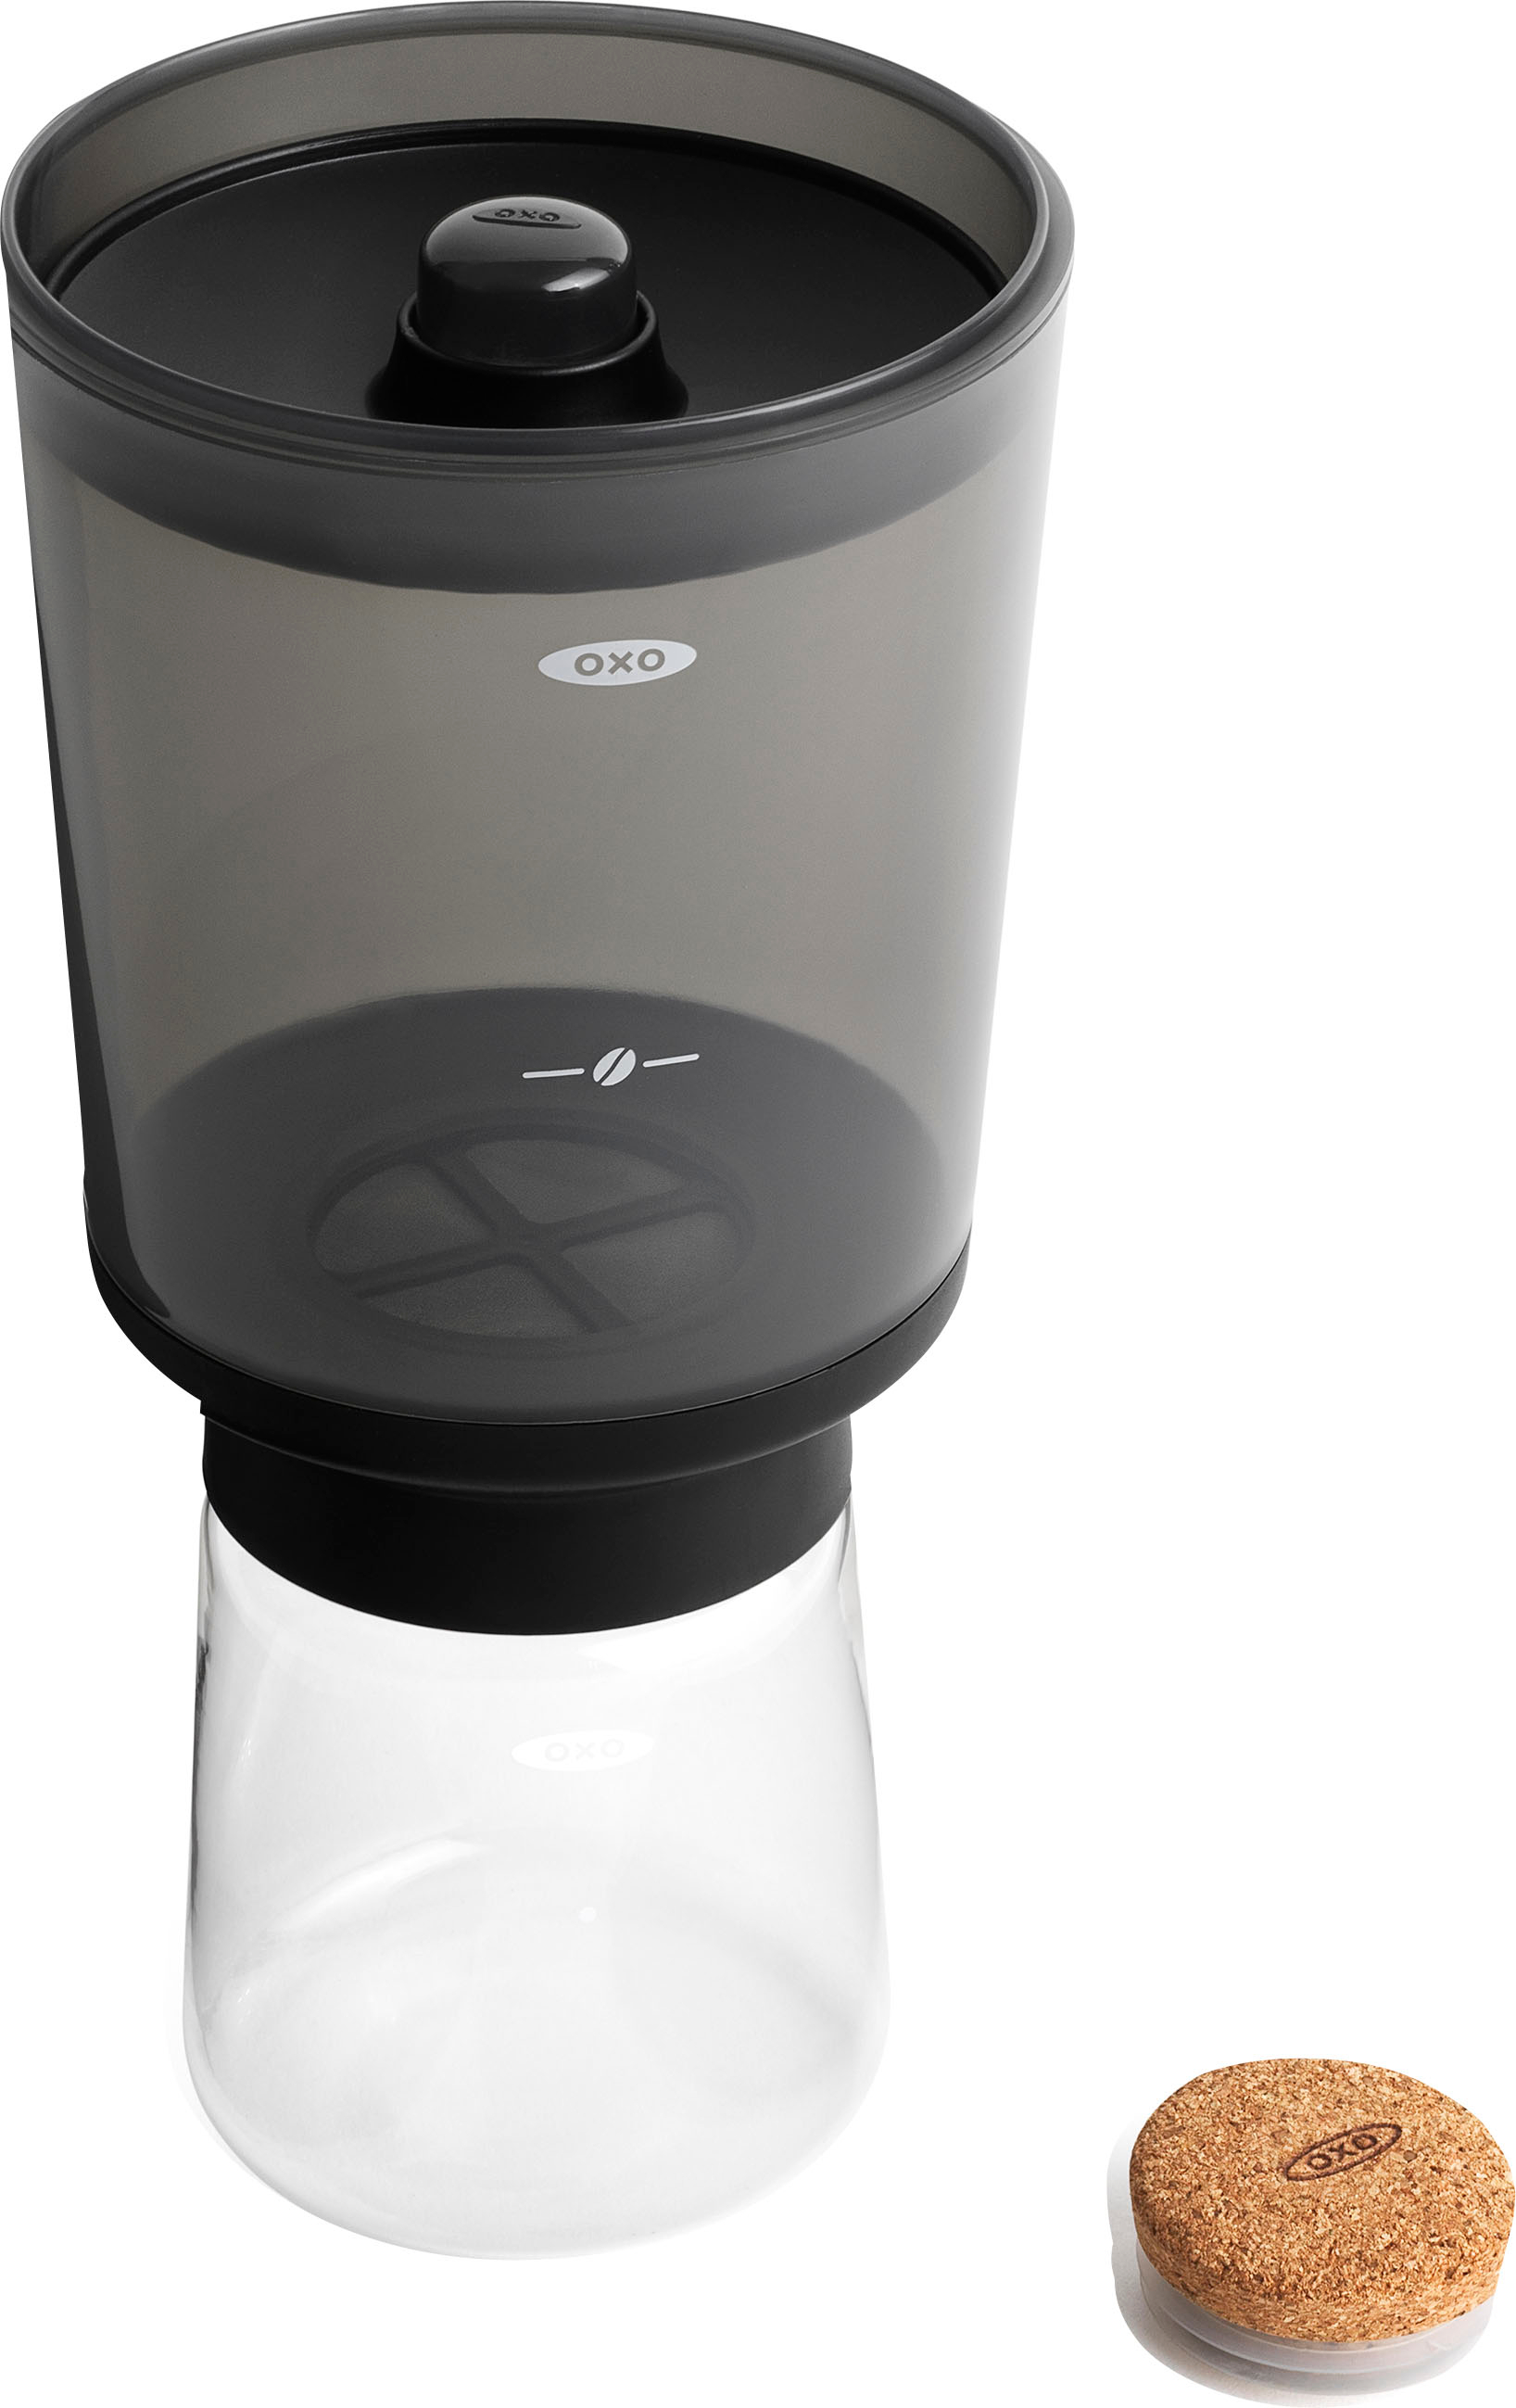 OXO Brew Compact Cold Brew Coffee Maker Black 11237500 - Best Buy